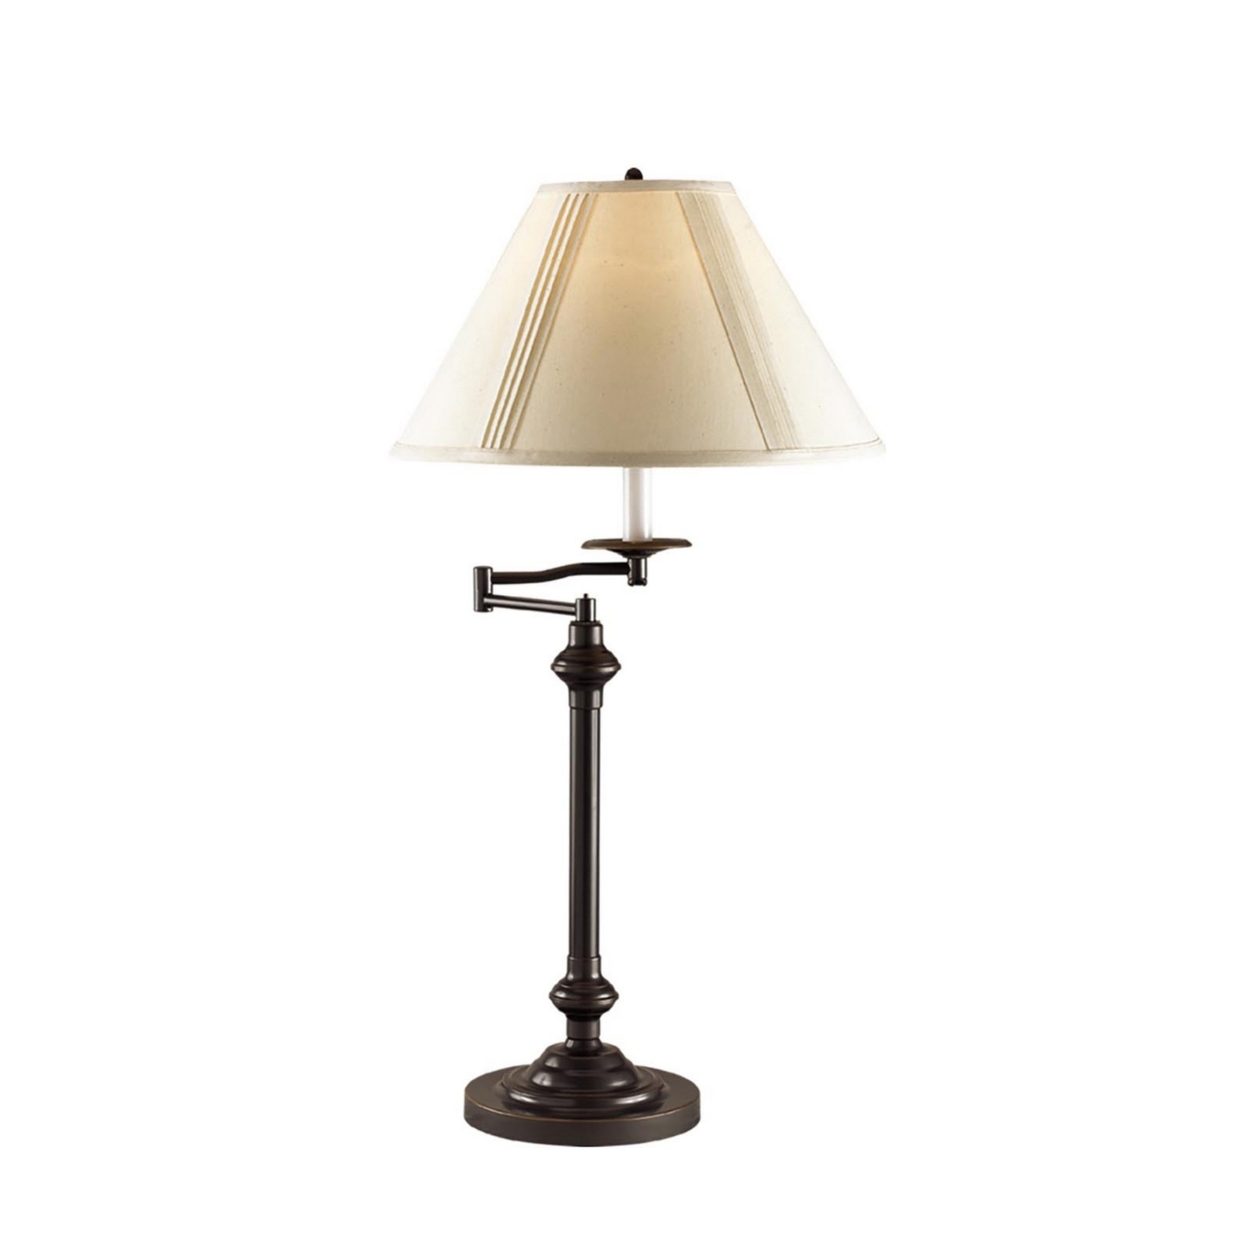 Fabric Wrapped Shade Table Lamp With Metal Base, Set Pf 4, Beige And Bronze- Saltoro Sherpi